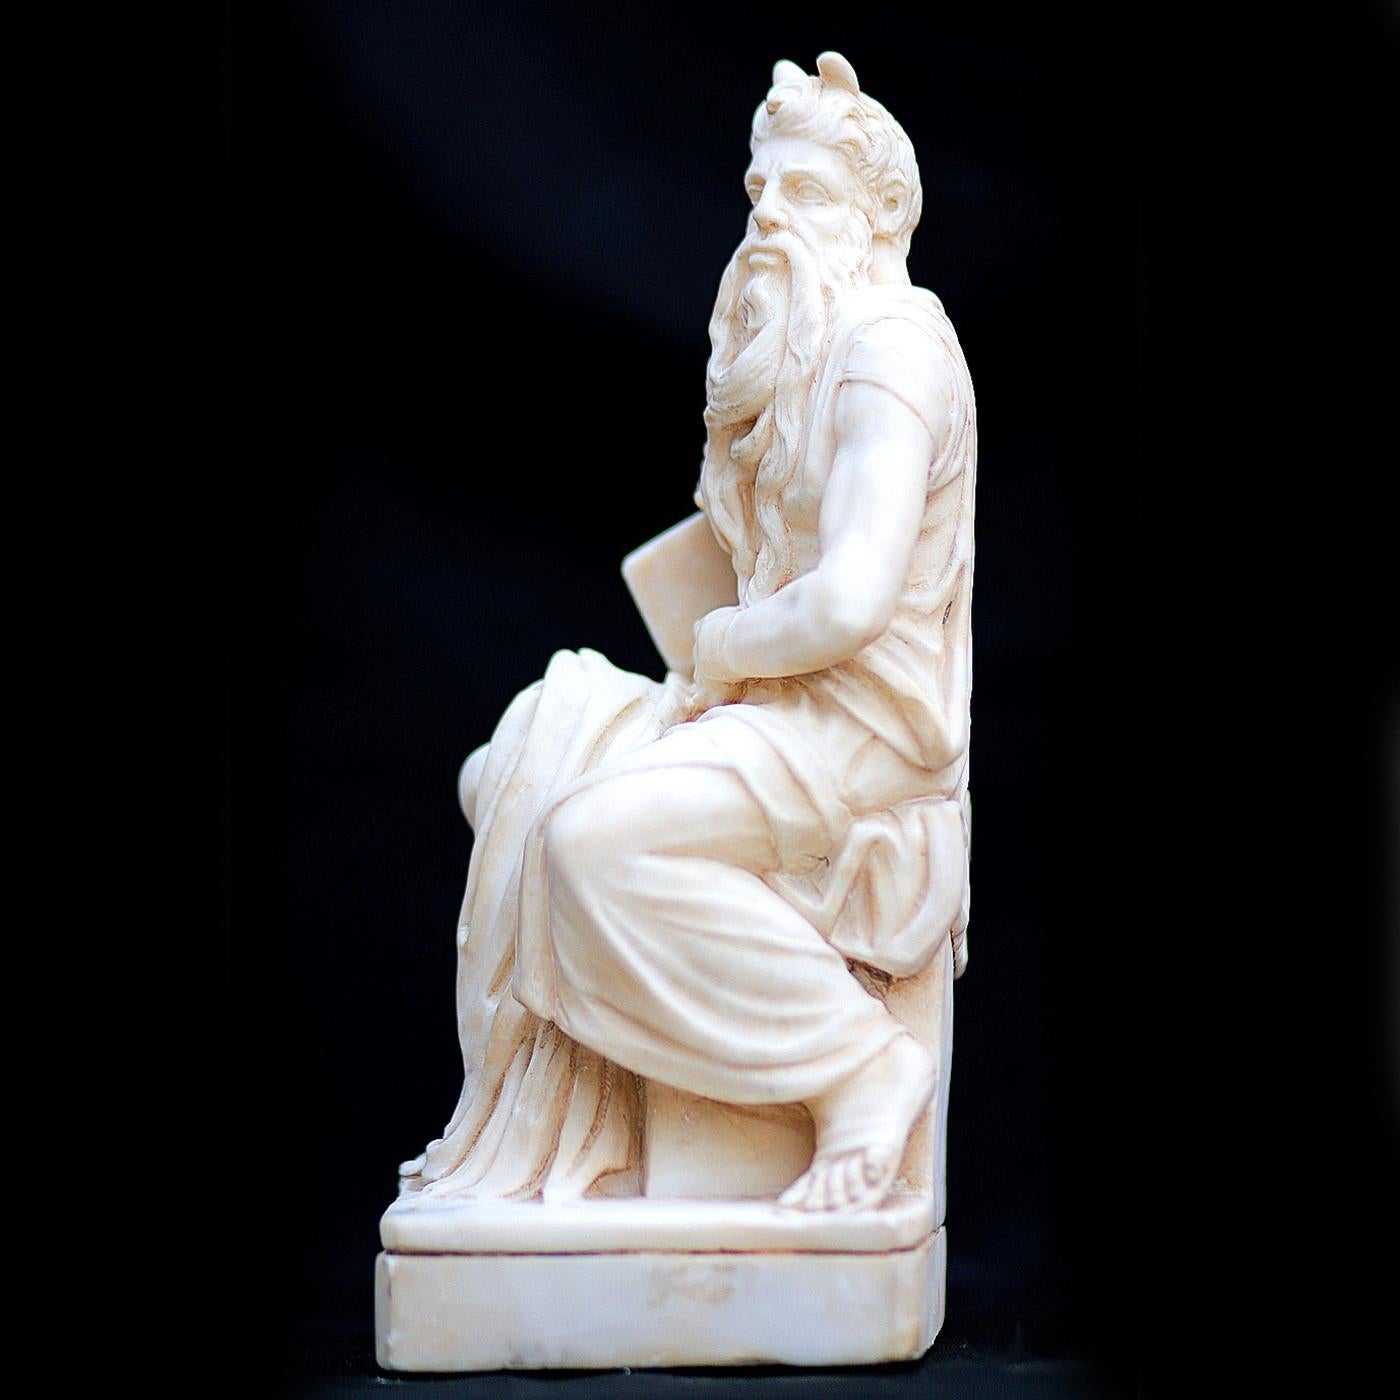 This alabaster work recreates one of the most famous statues of Renaissance Italy, Michelangelo's Moses. The bearded prophet is seated with his head facing left. His right foot is resting squarely on the ground, while the left one is dynamically